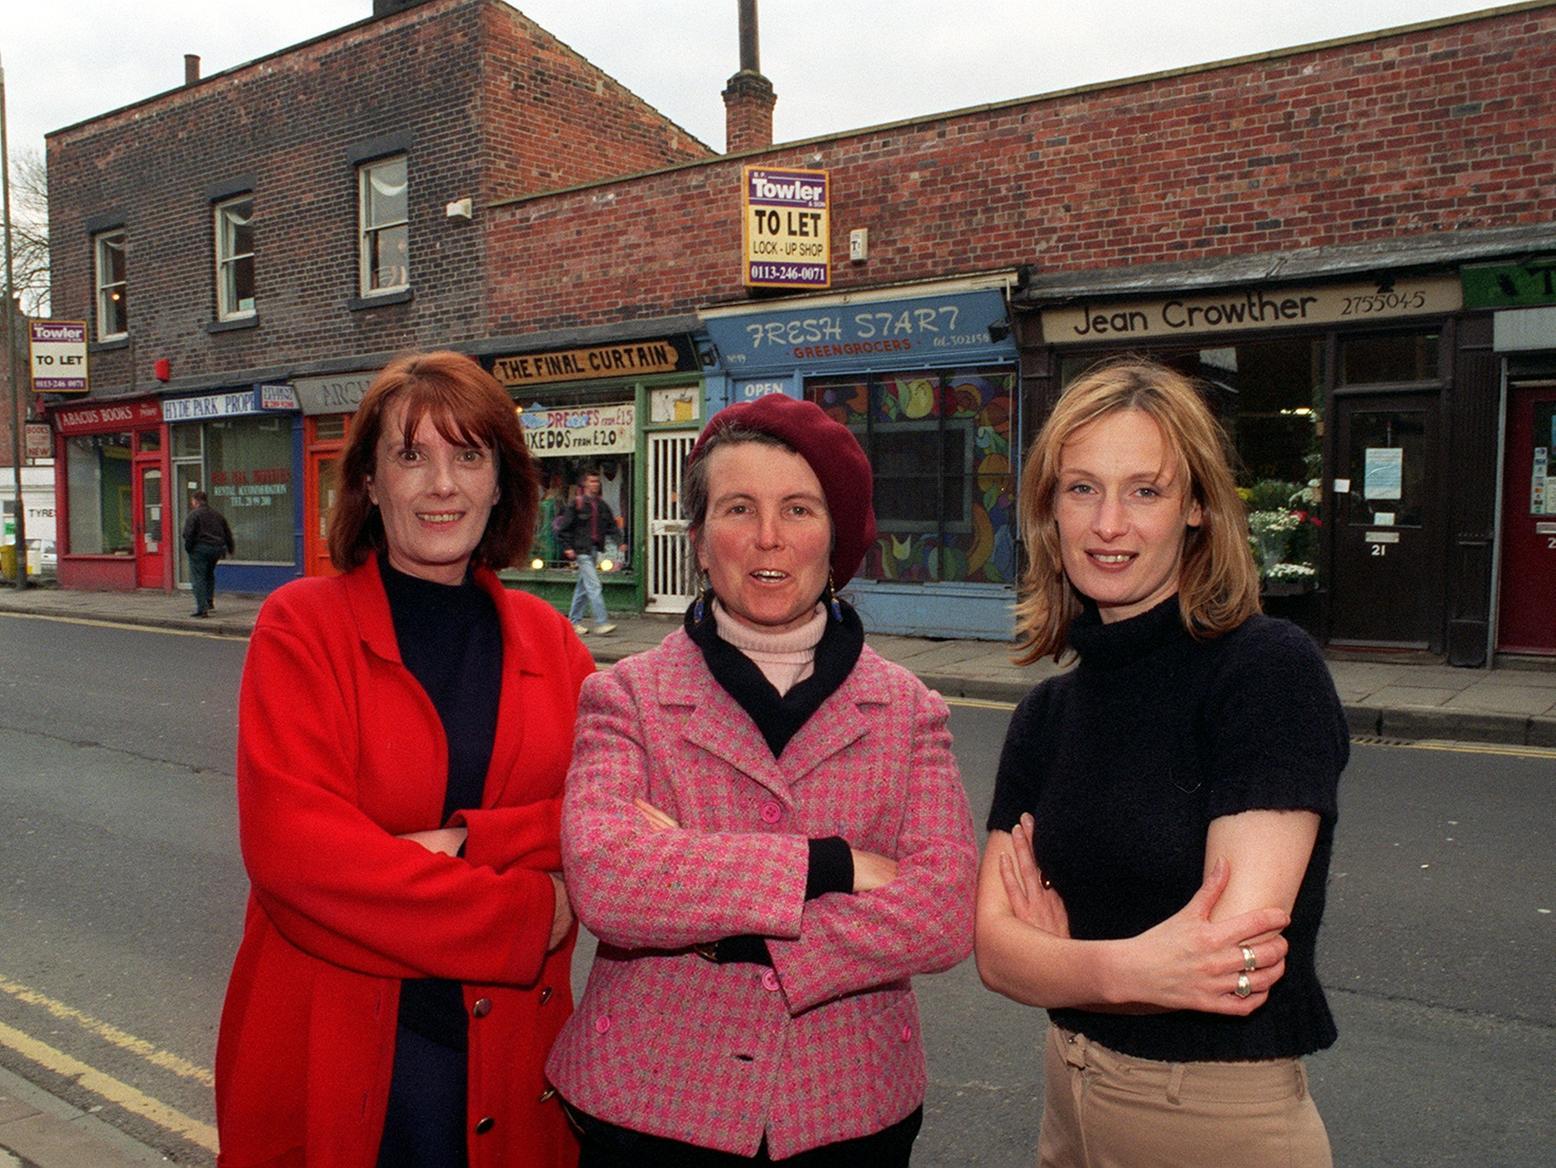 These Headingley Lane shop owners - Jean Crowther, Imelda Smolinski, Louise Howard - were also unhappy. They had not been offered compensation despite the route going through these shops.